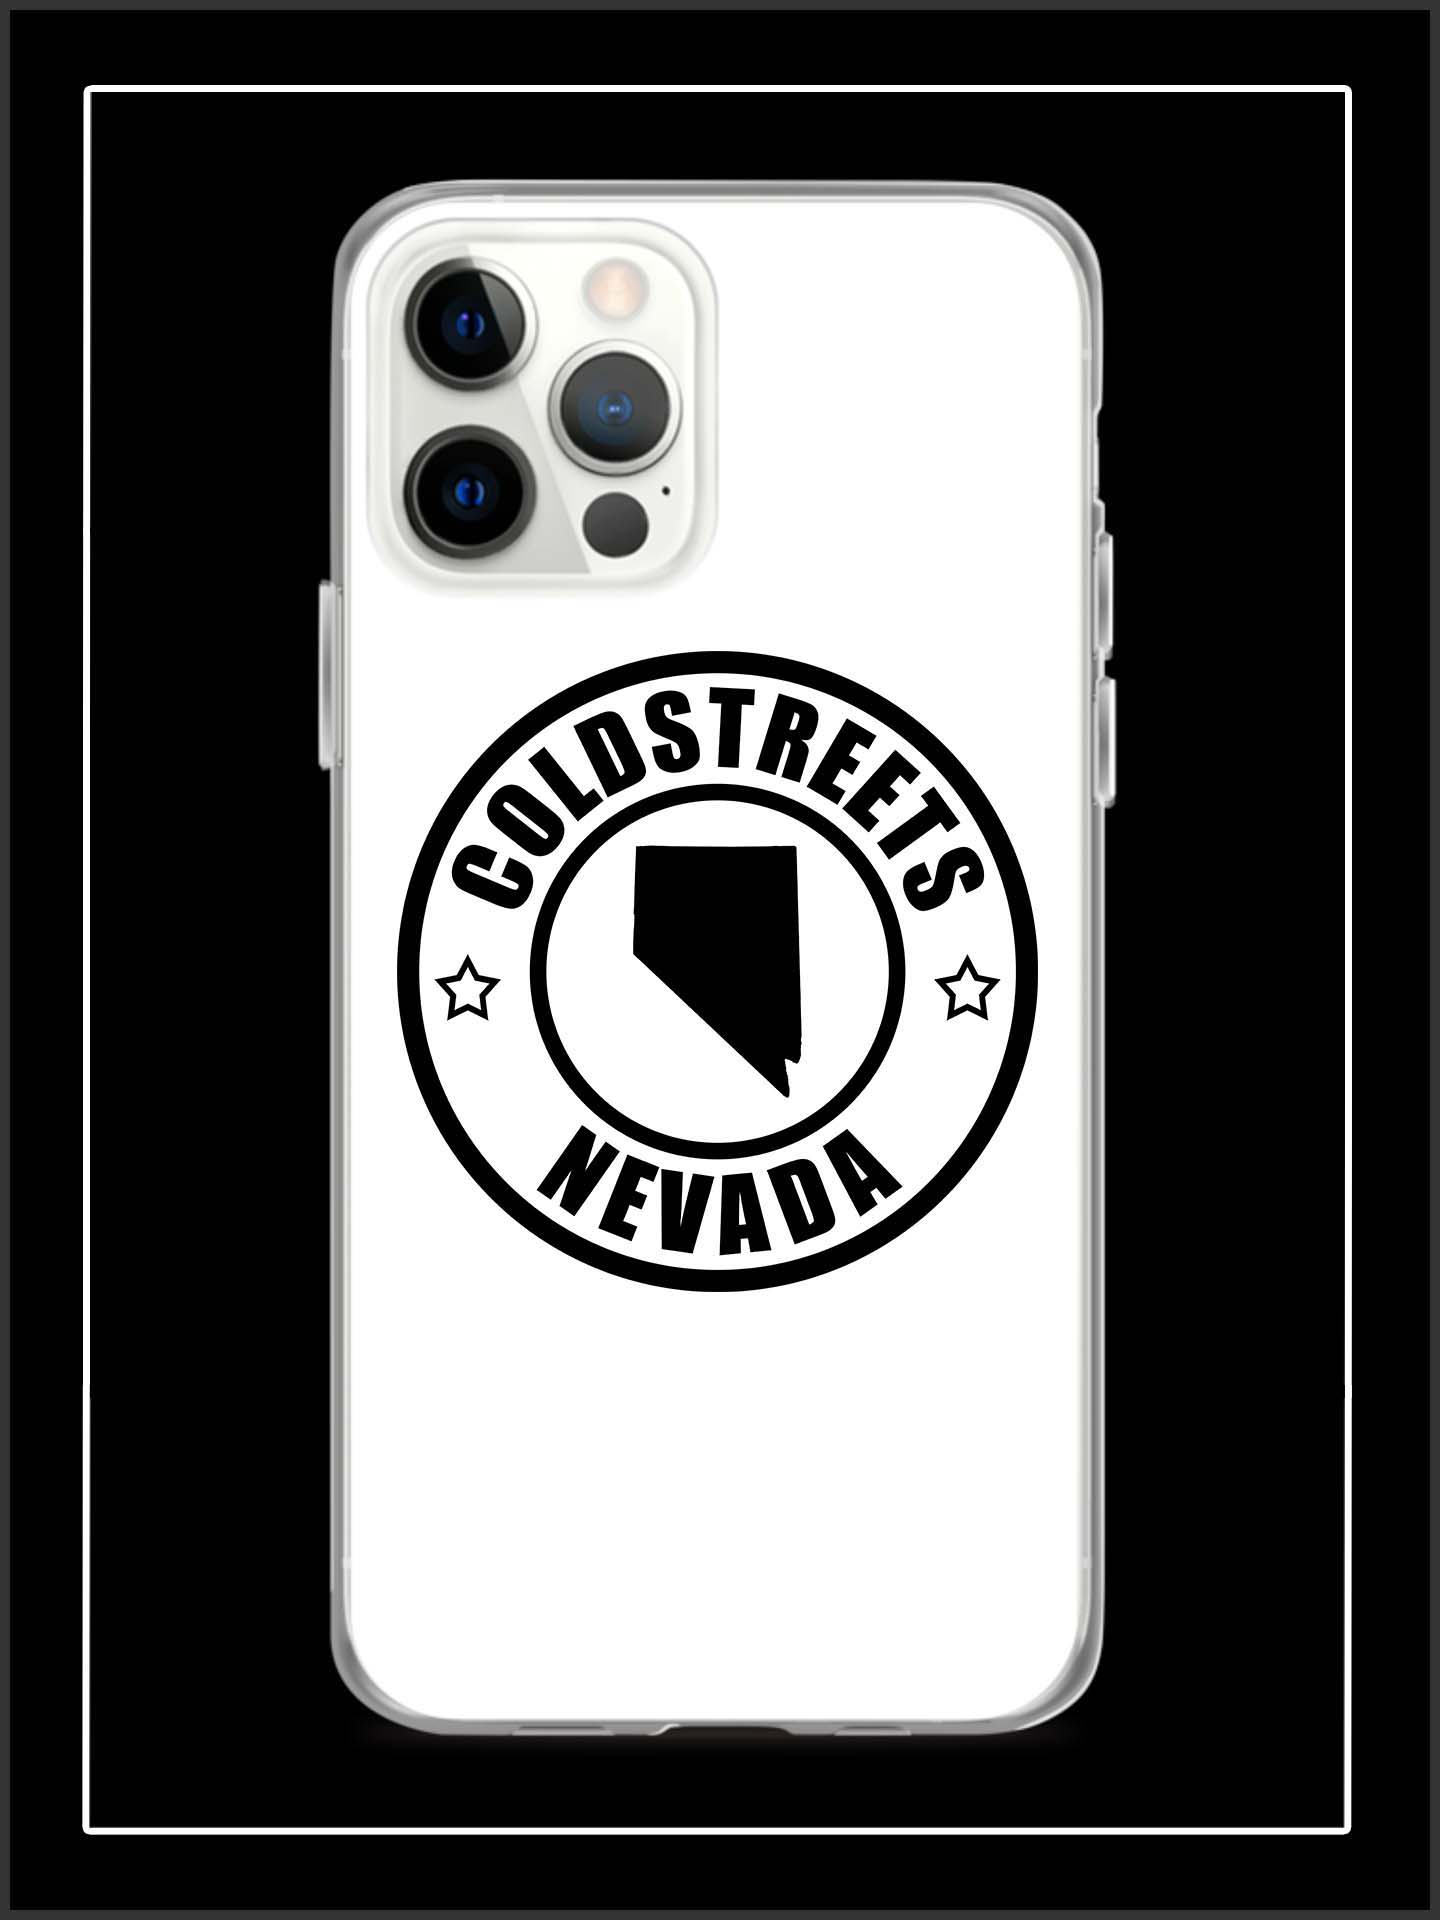 Cold Streets Nevada iPhone Cases